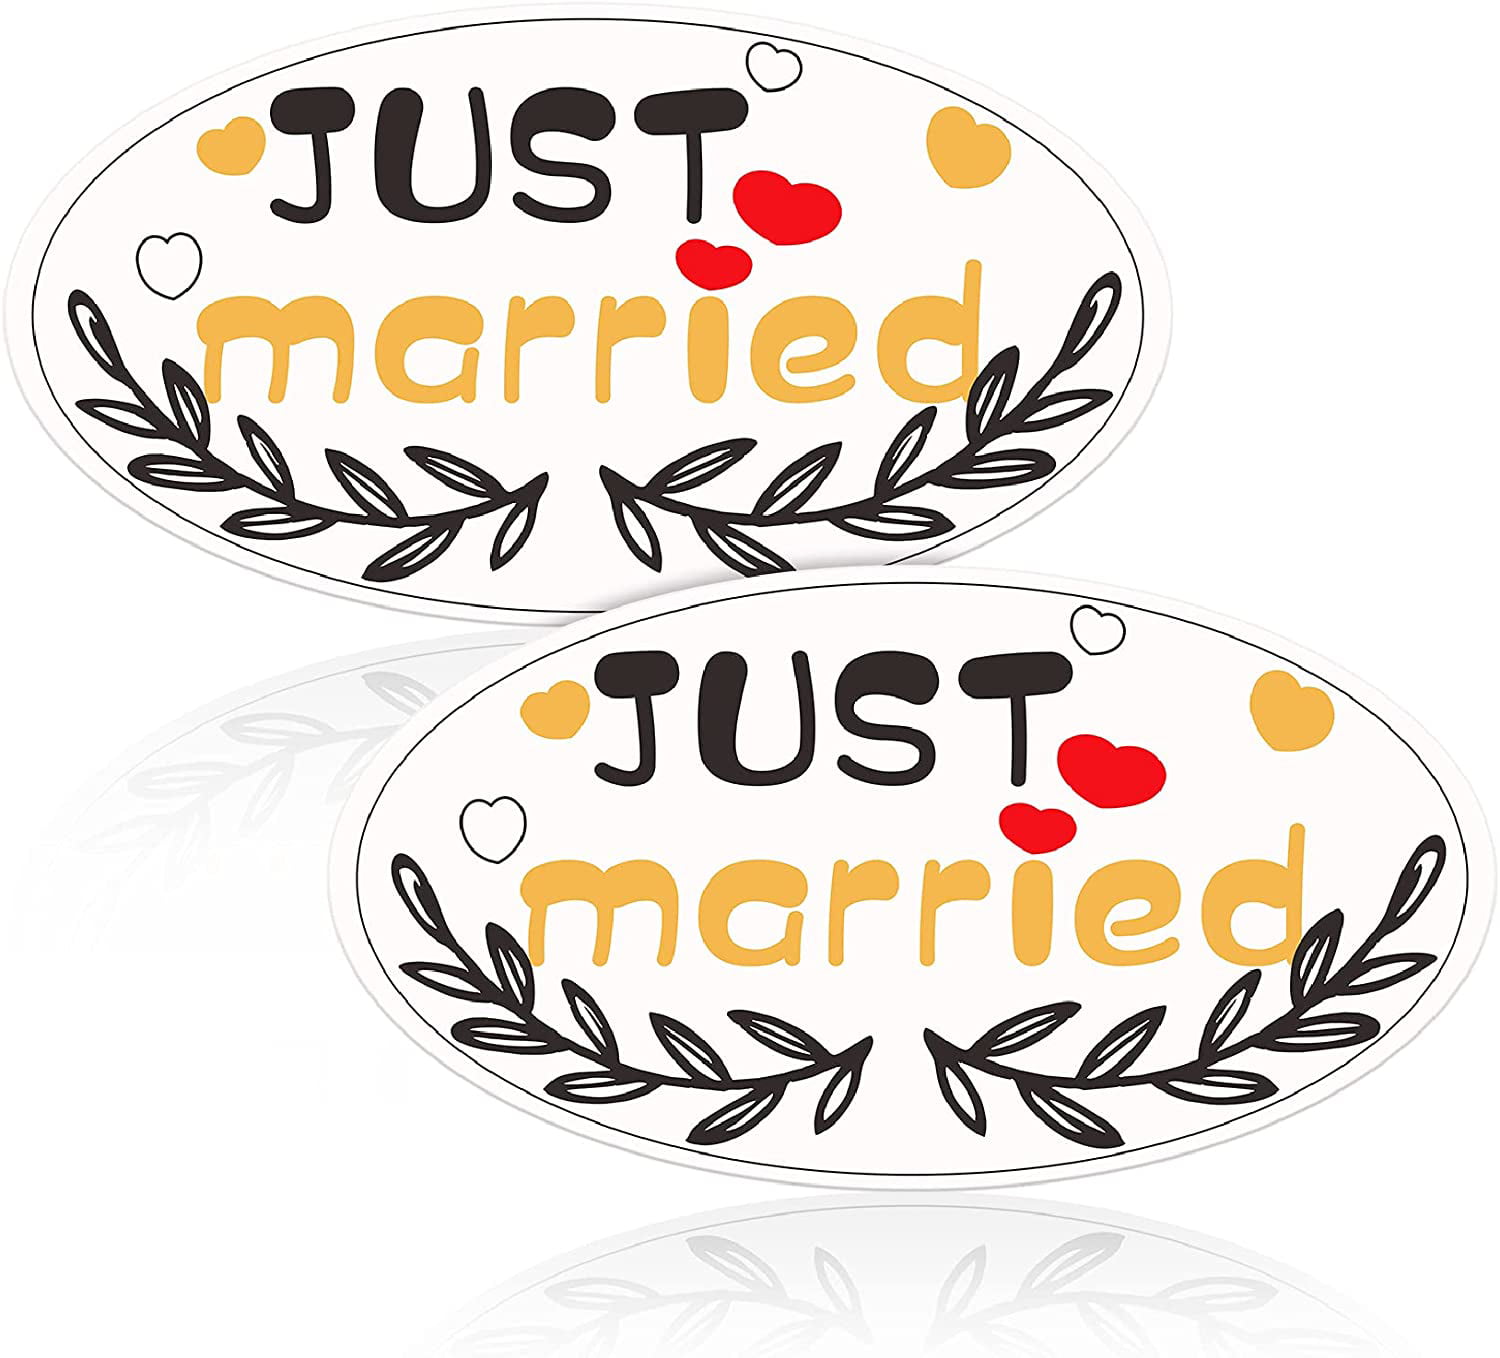 20 Pieces Just Married Sign Car Magnets Red Heart Garage Door Magnets Decals Ornate Wedding Car Decorations Just Married Door Sign for Honeymoon Anniversary Wedding Party Panel Tailgate Decor 